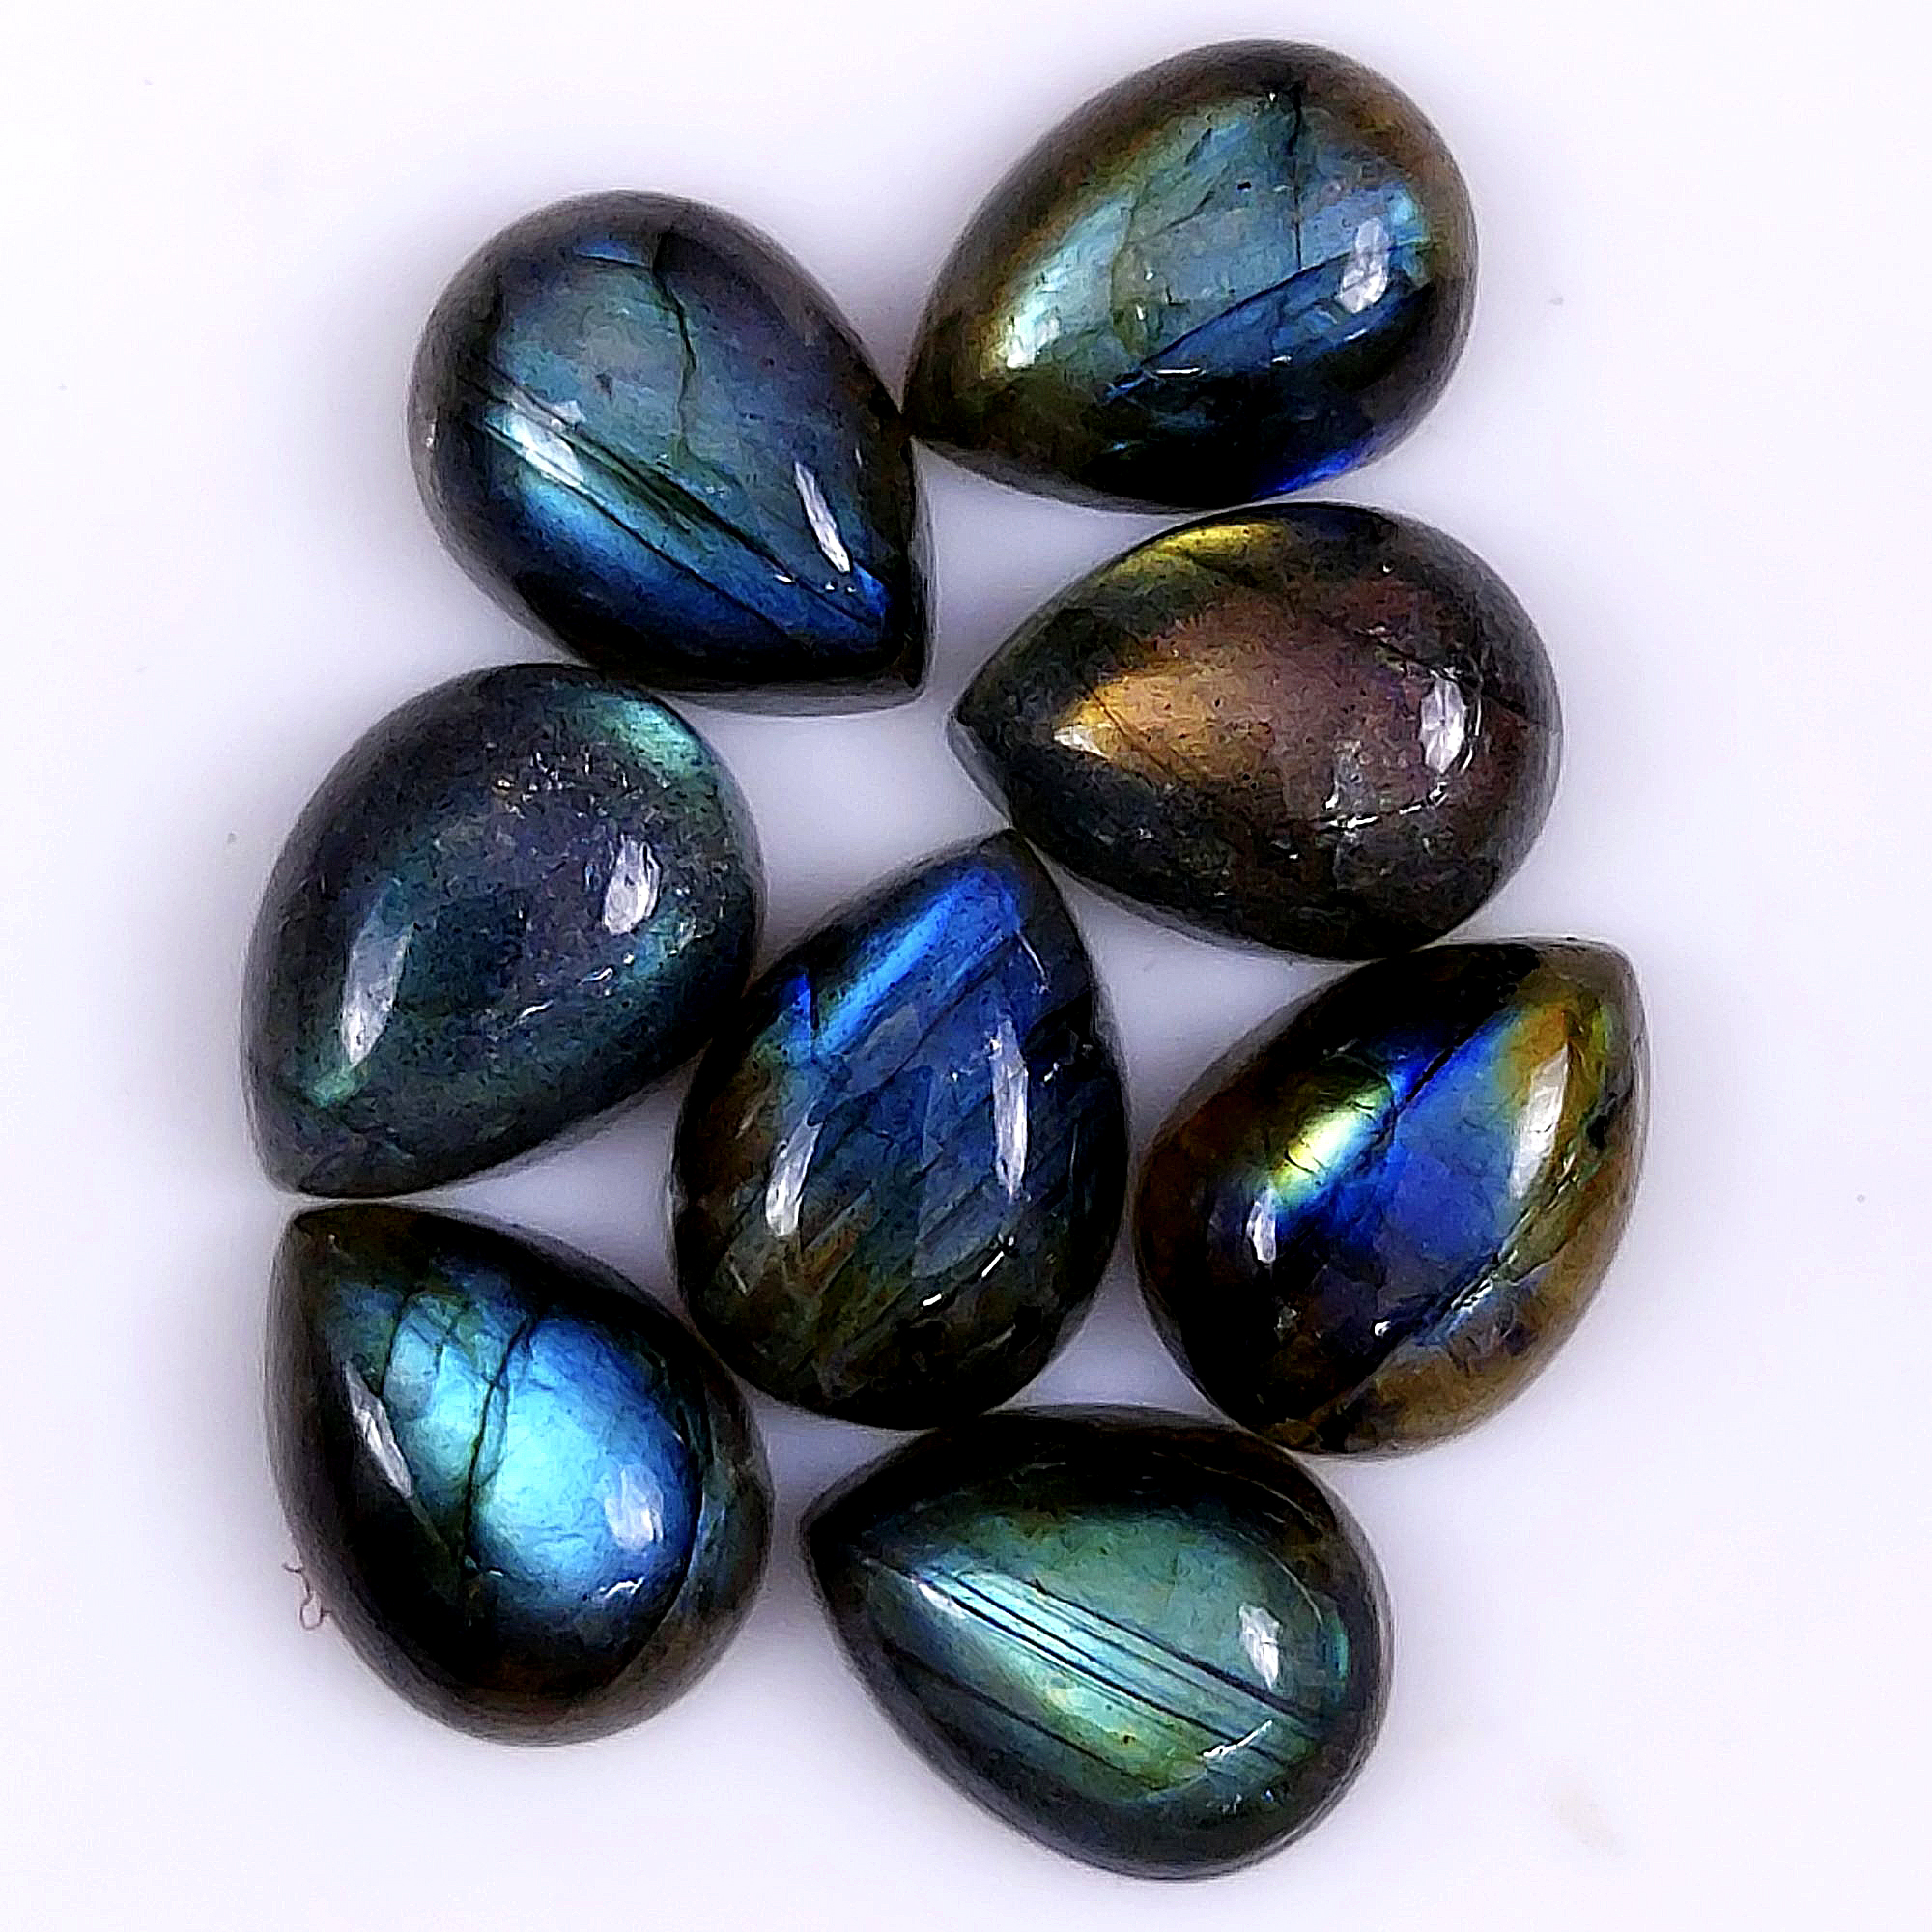 8 Pcs 73Cts Natural Labradorite Cabochon pear Shape Multifire Calibrated Loose Gemstone for jewelry making Wholesale Lots Size12x16mm#G-1588